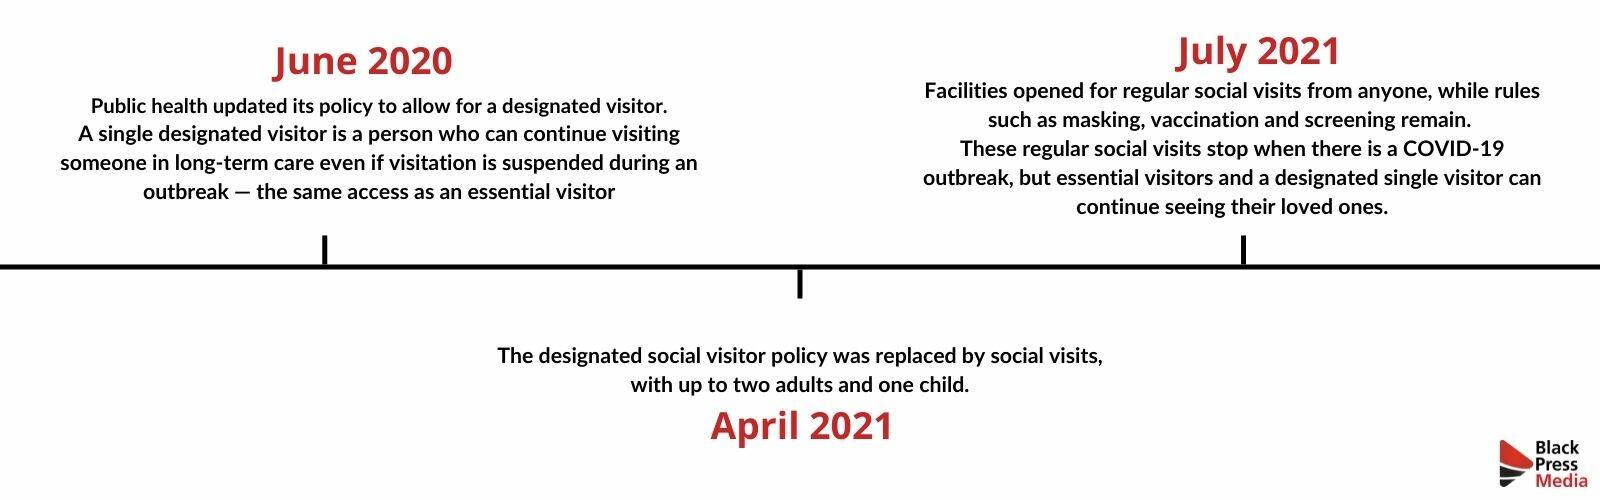 Timeline of COVID visiting restrictions